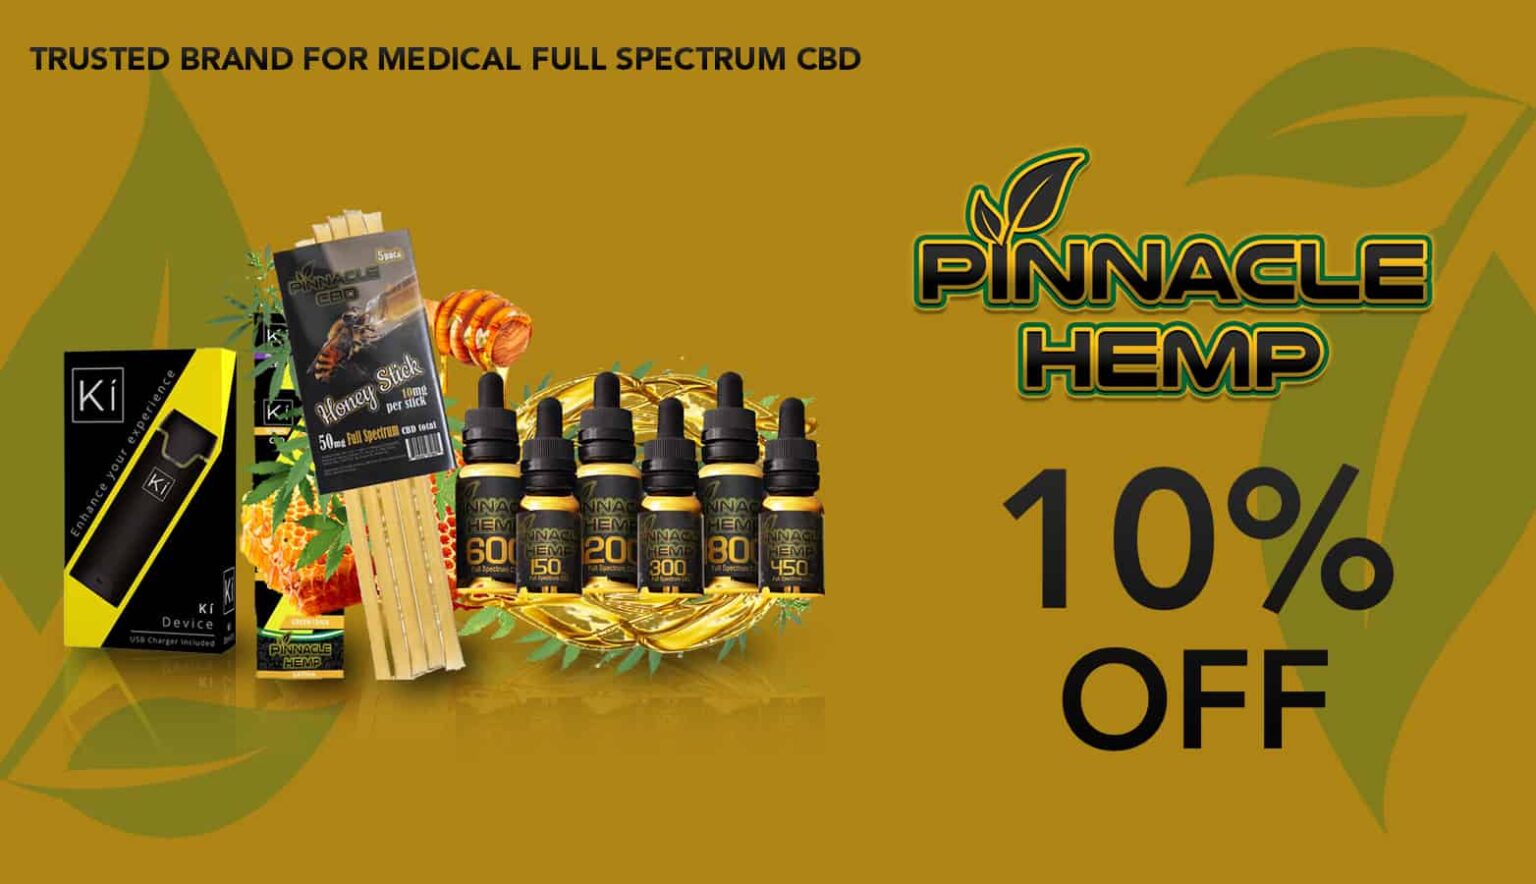 Get Verified Hemp Delta 9 THC Coupons at Save On Cannabis